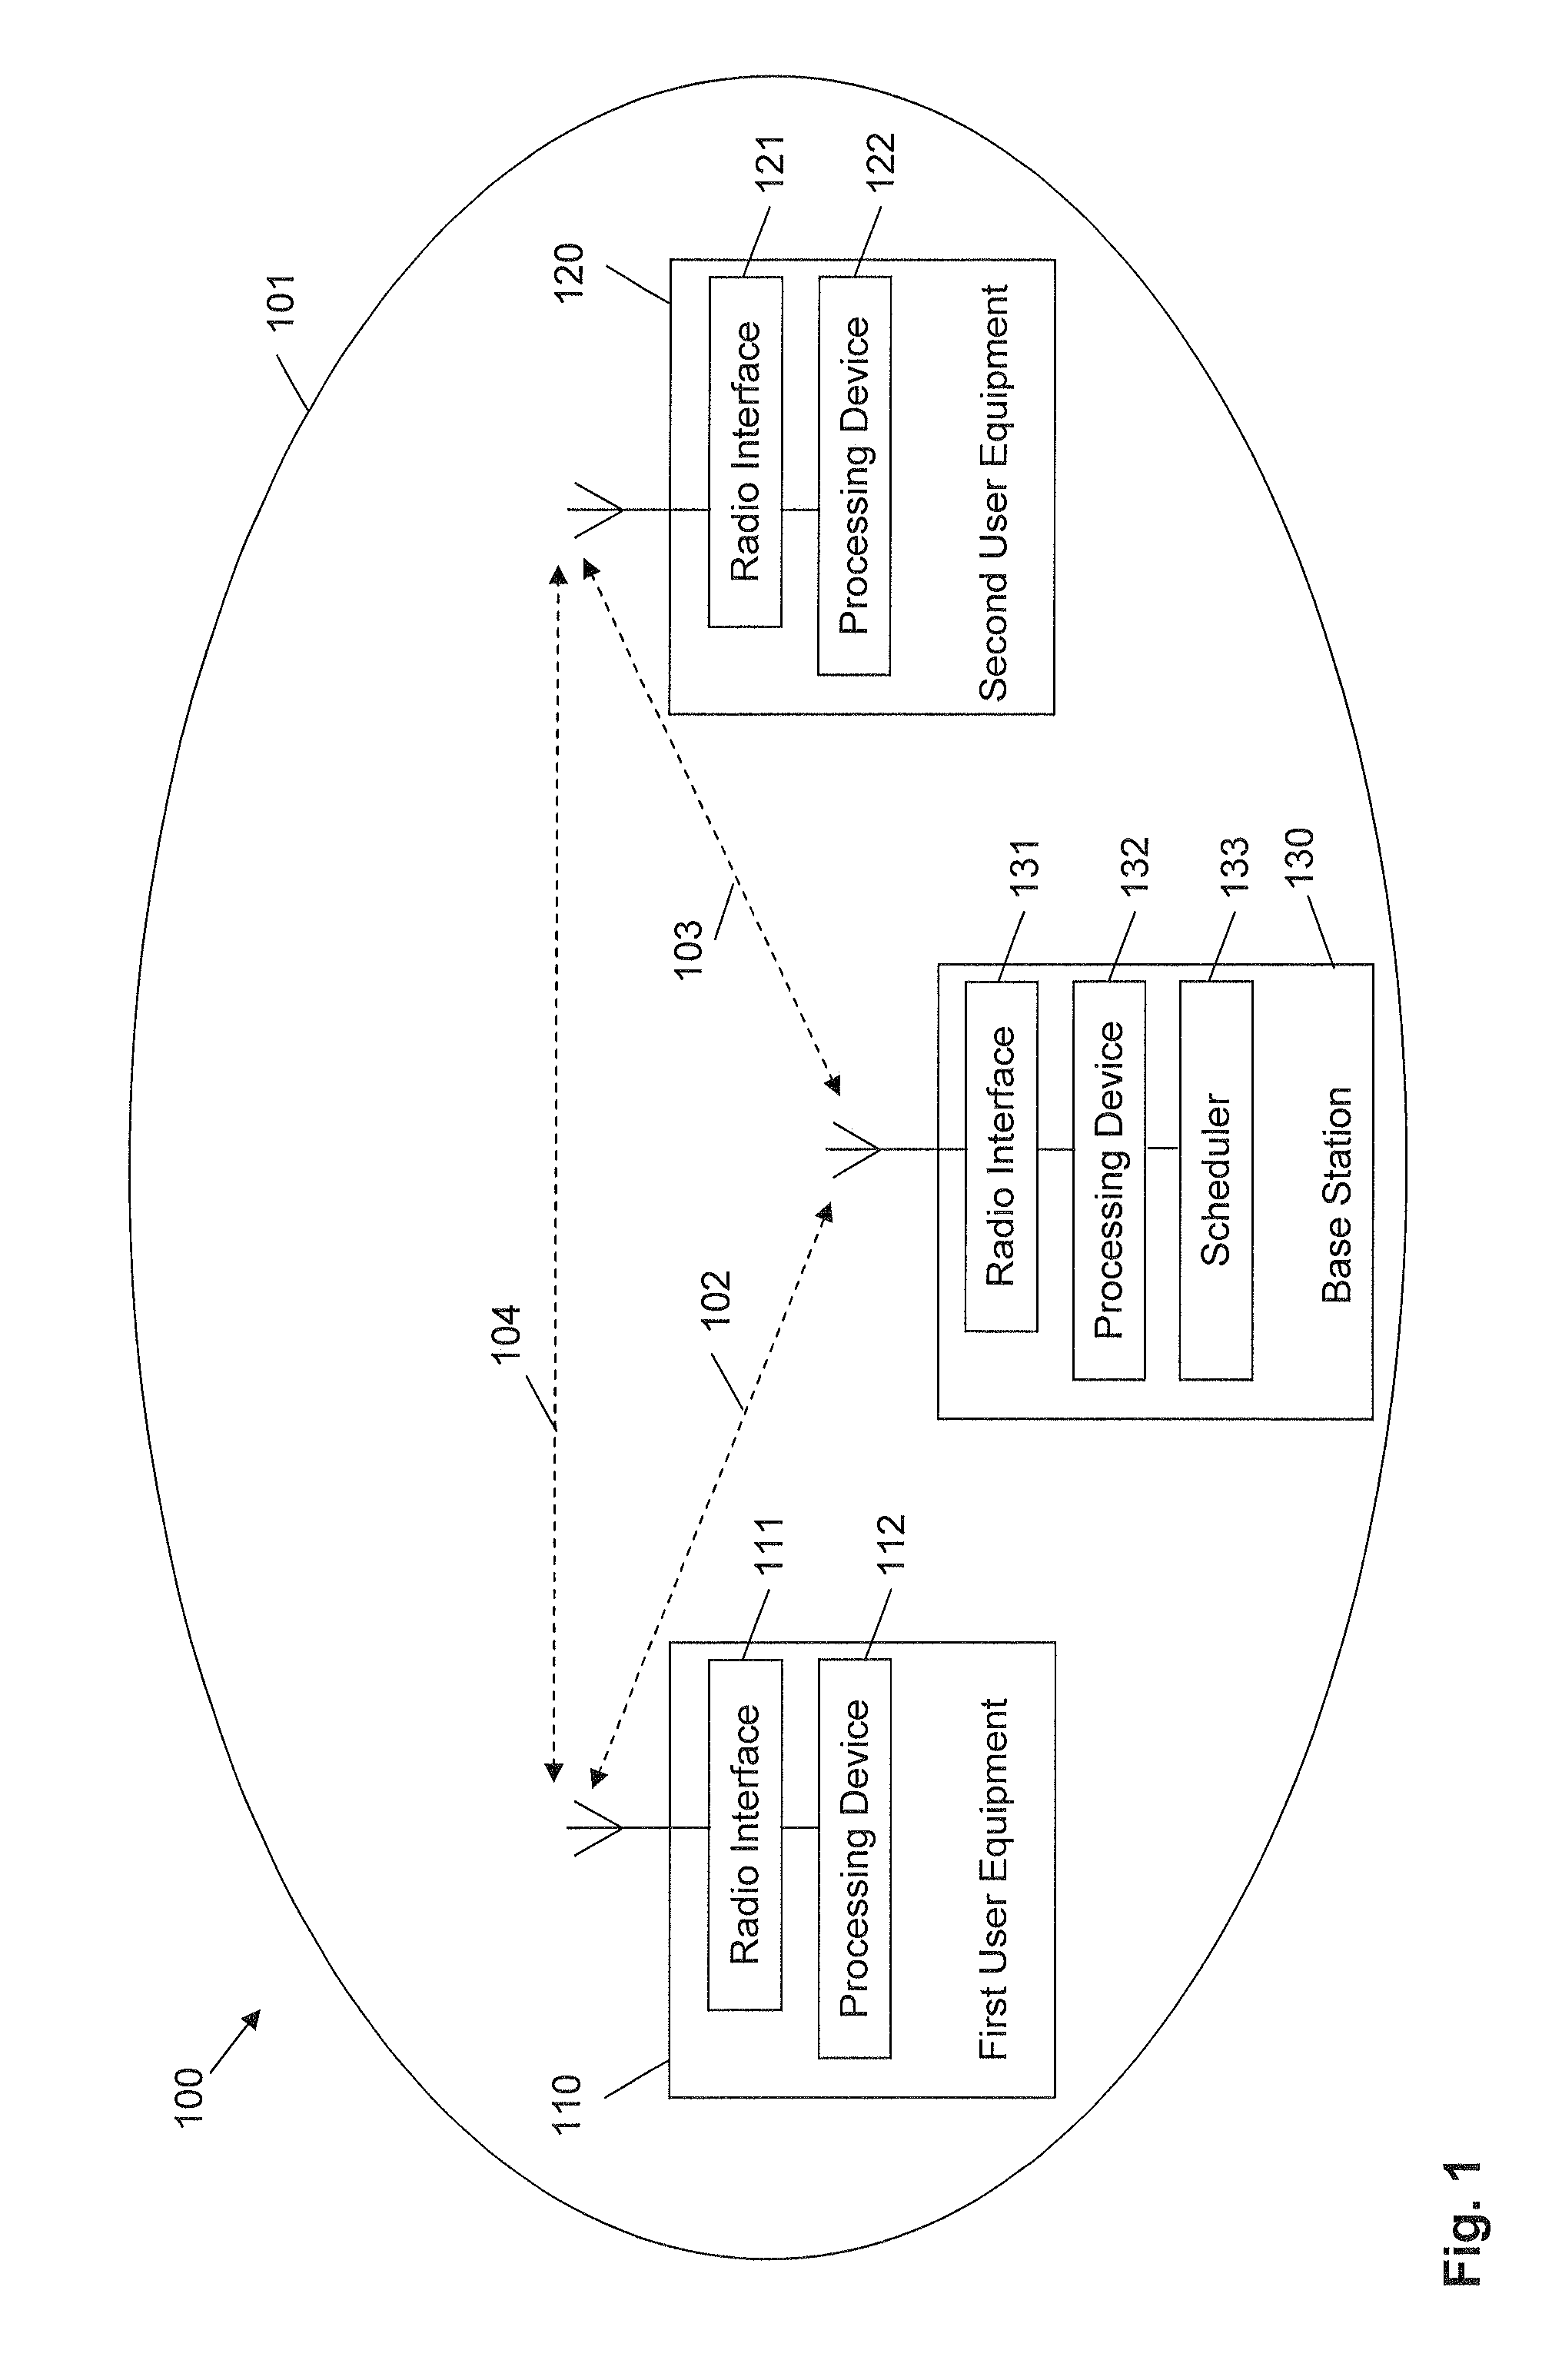 Operating a base station of a radio access network